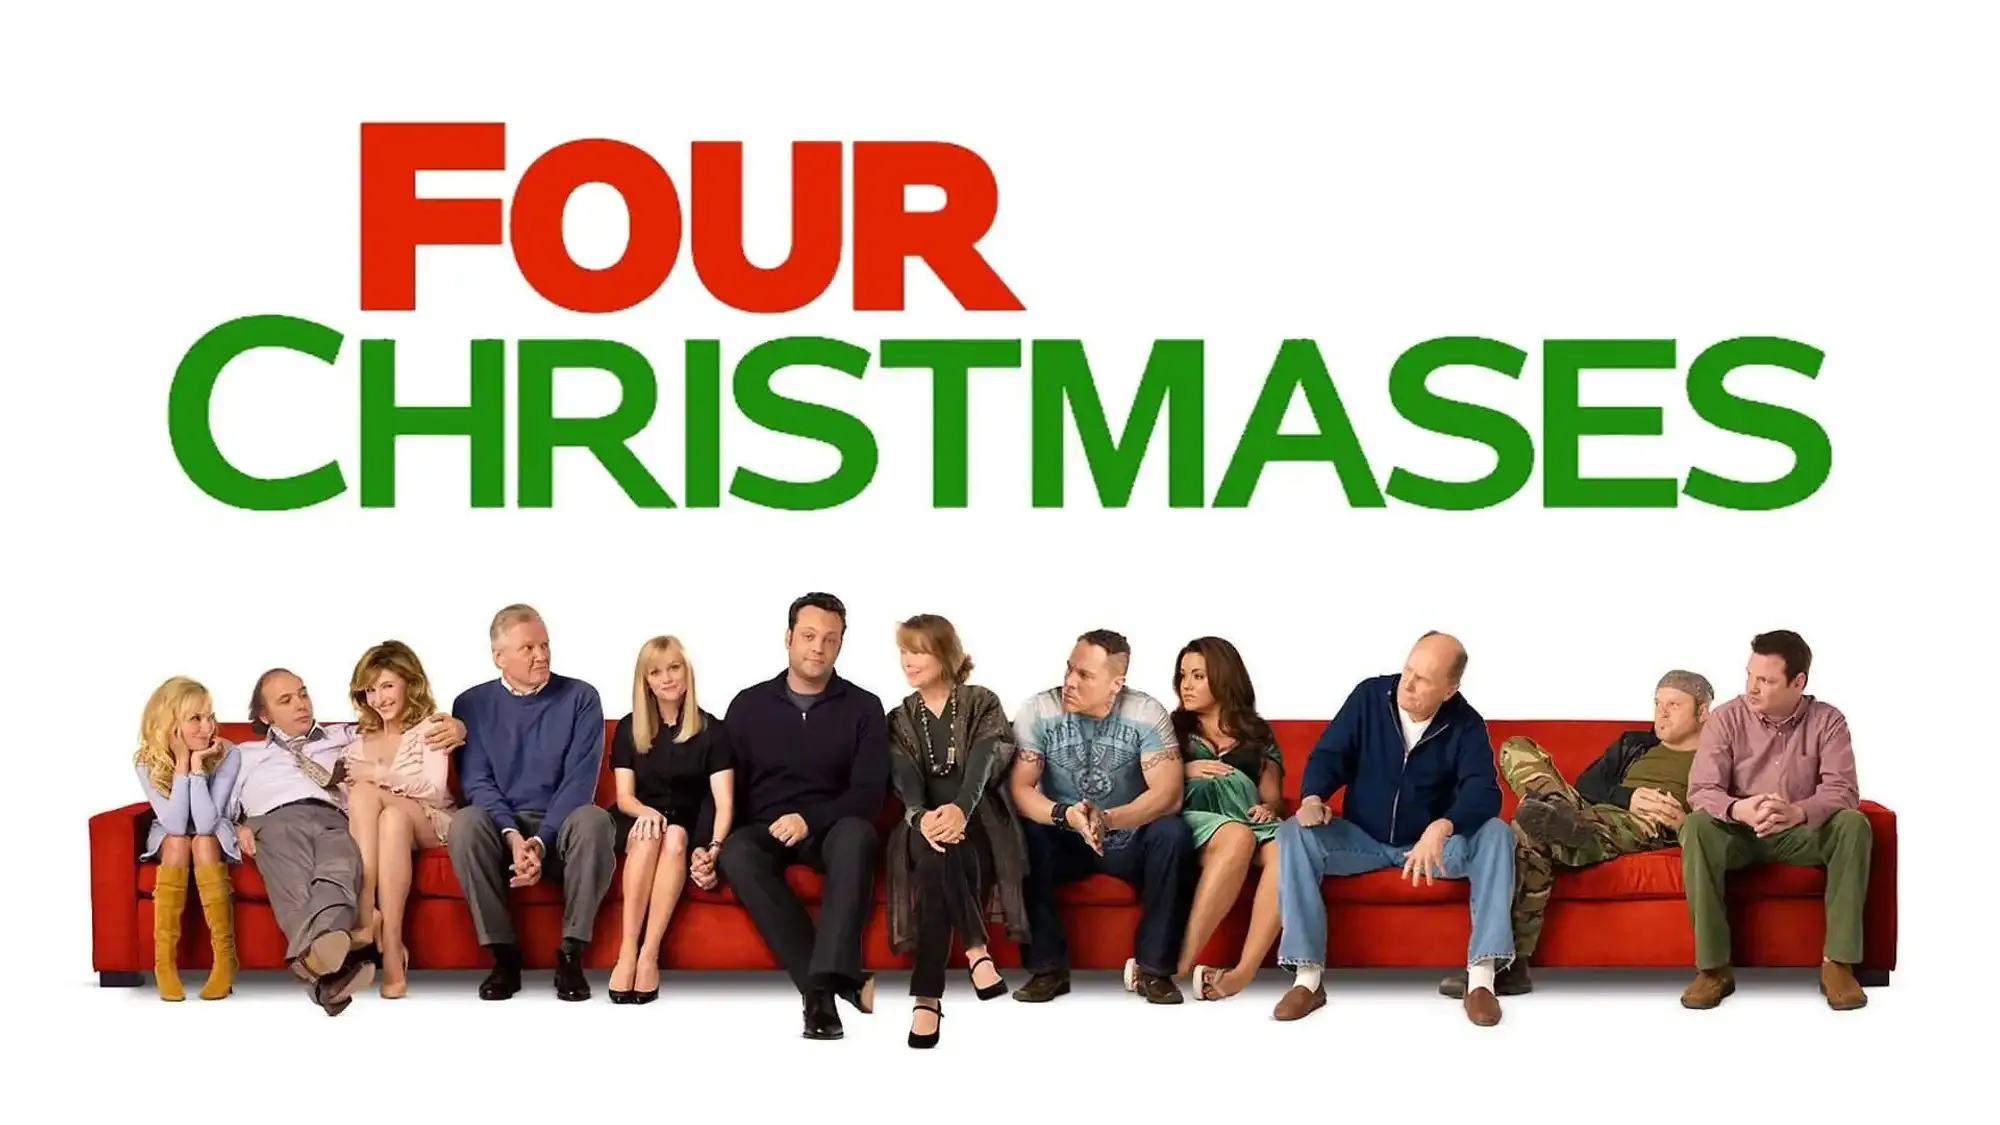 Four Christmases movie review